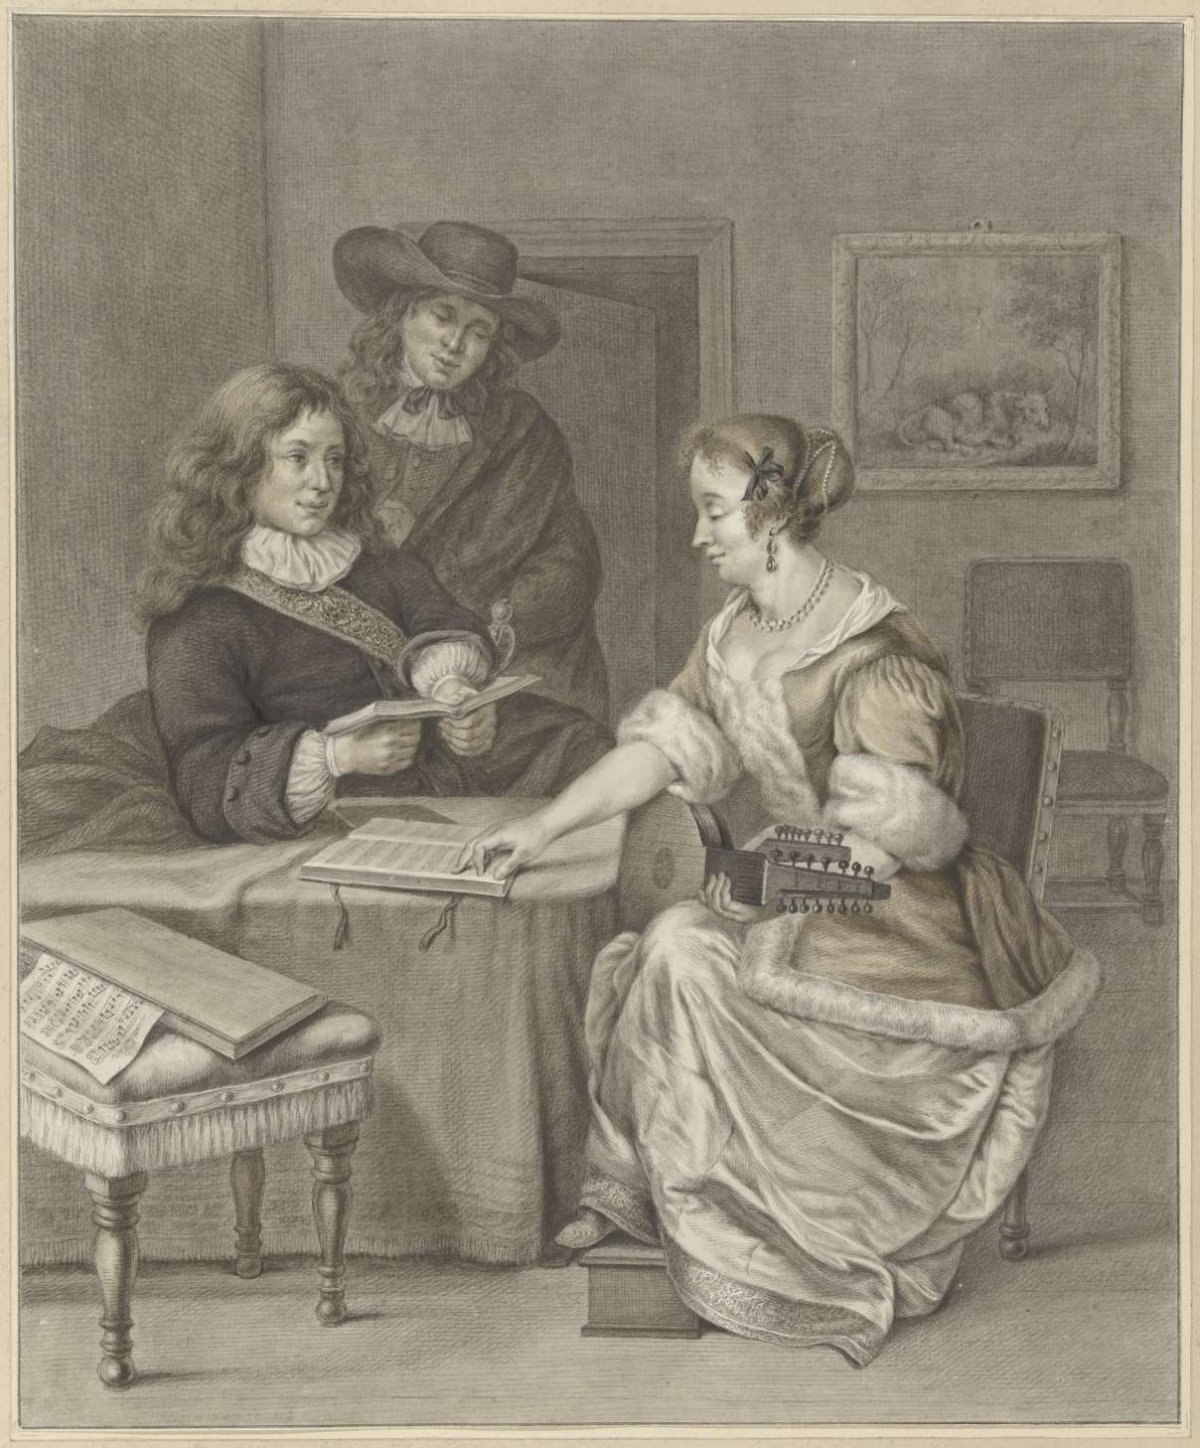 Couple making music, a man looks on, Abraham Delfos, 1741 - 1820